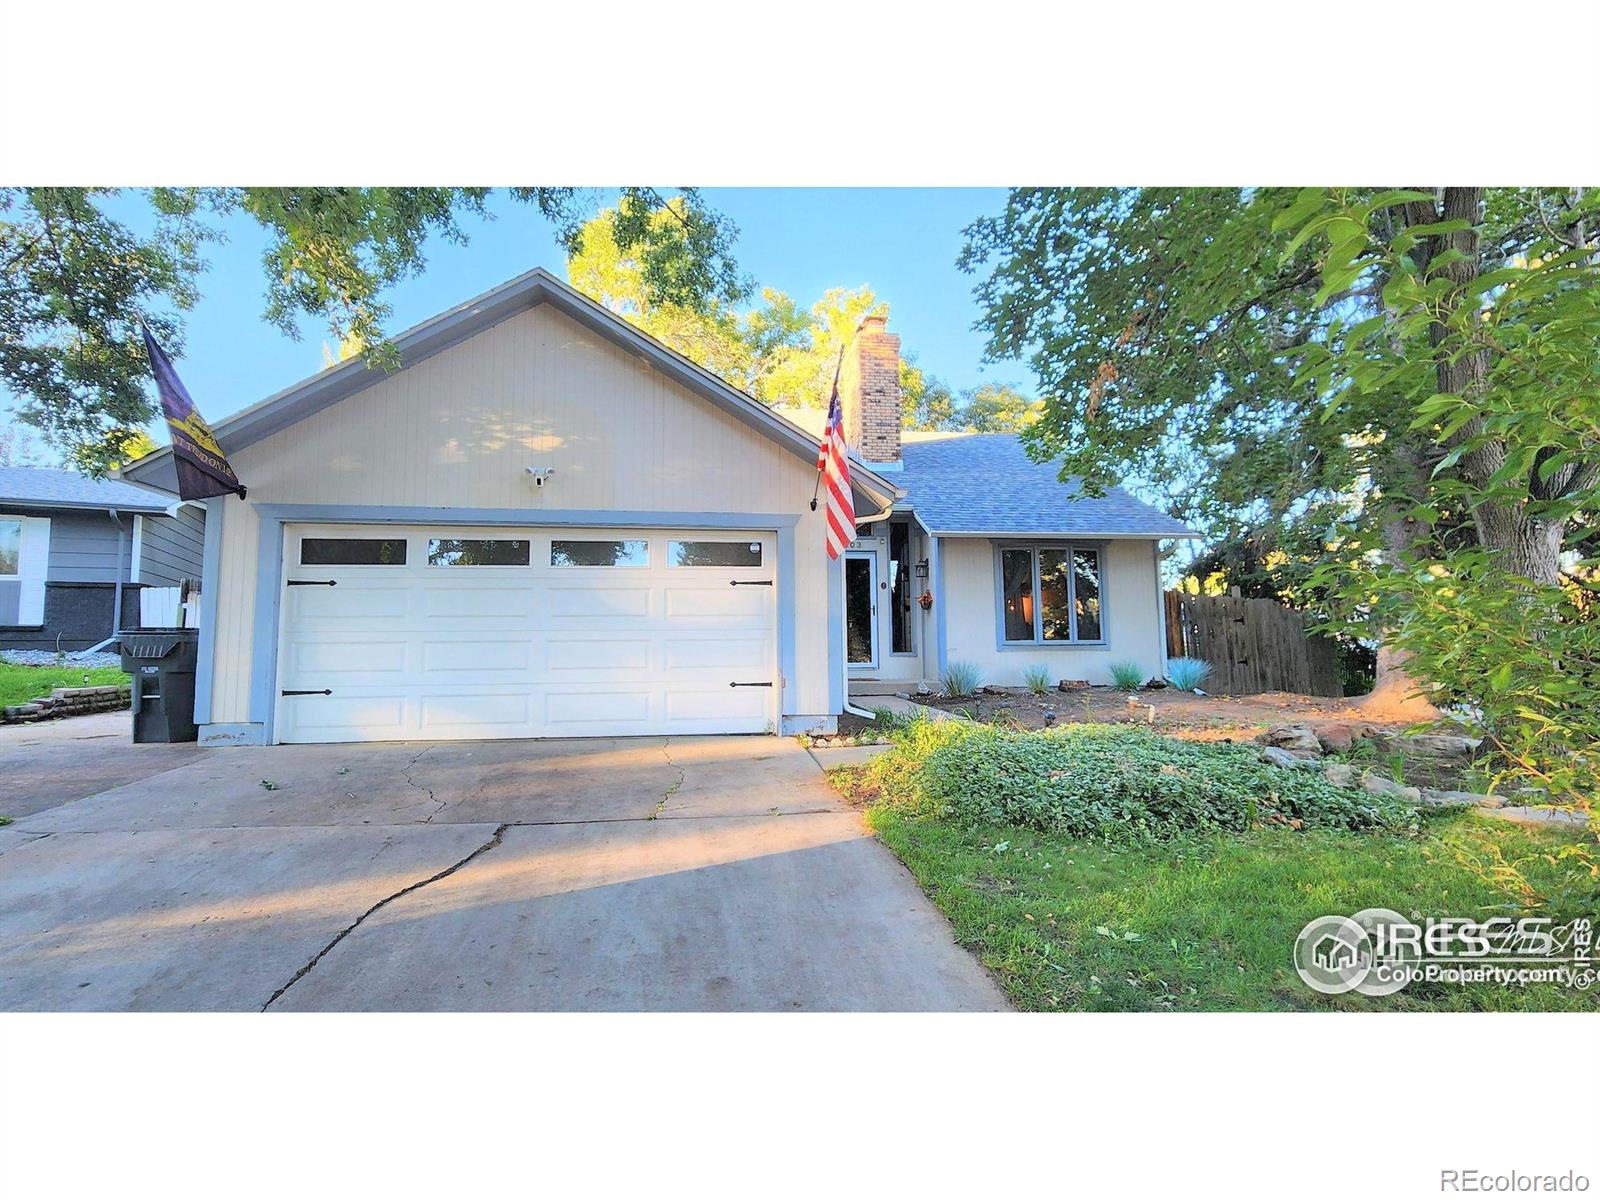 3903 W 14th St Rd, greeley MLS: 4567891005189 Beds: 4 Baths: 3 Price: $445,000